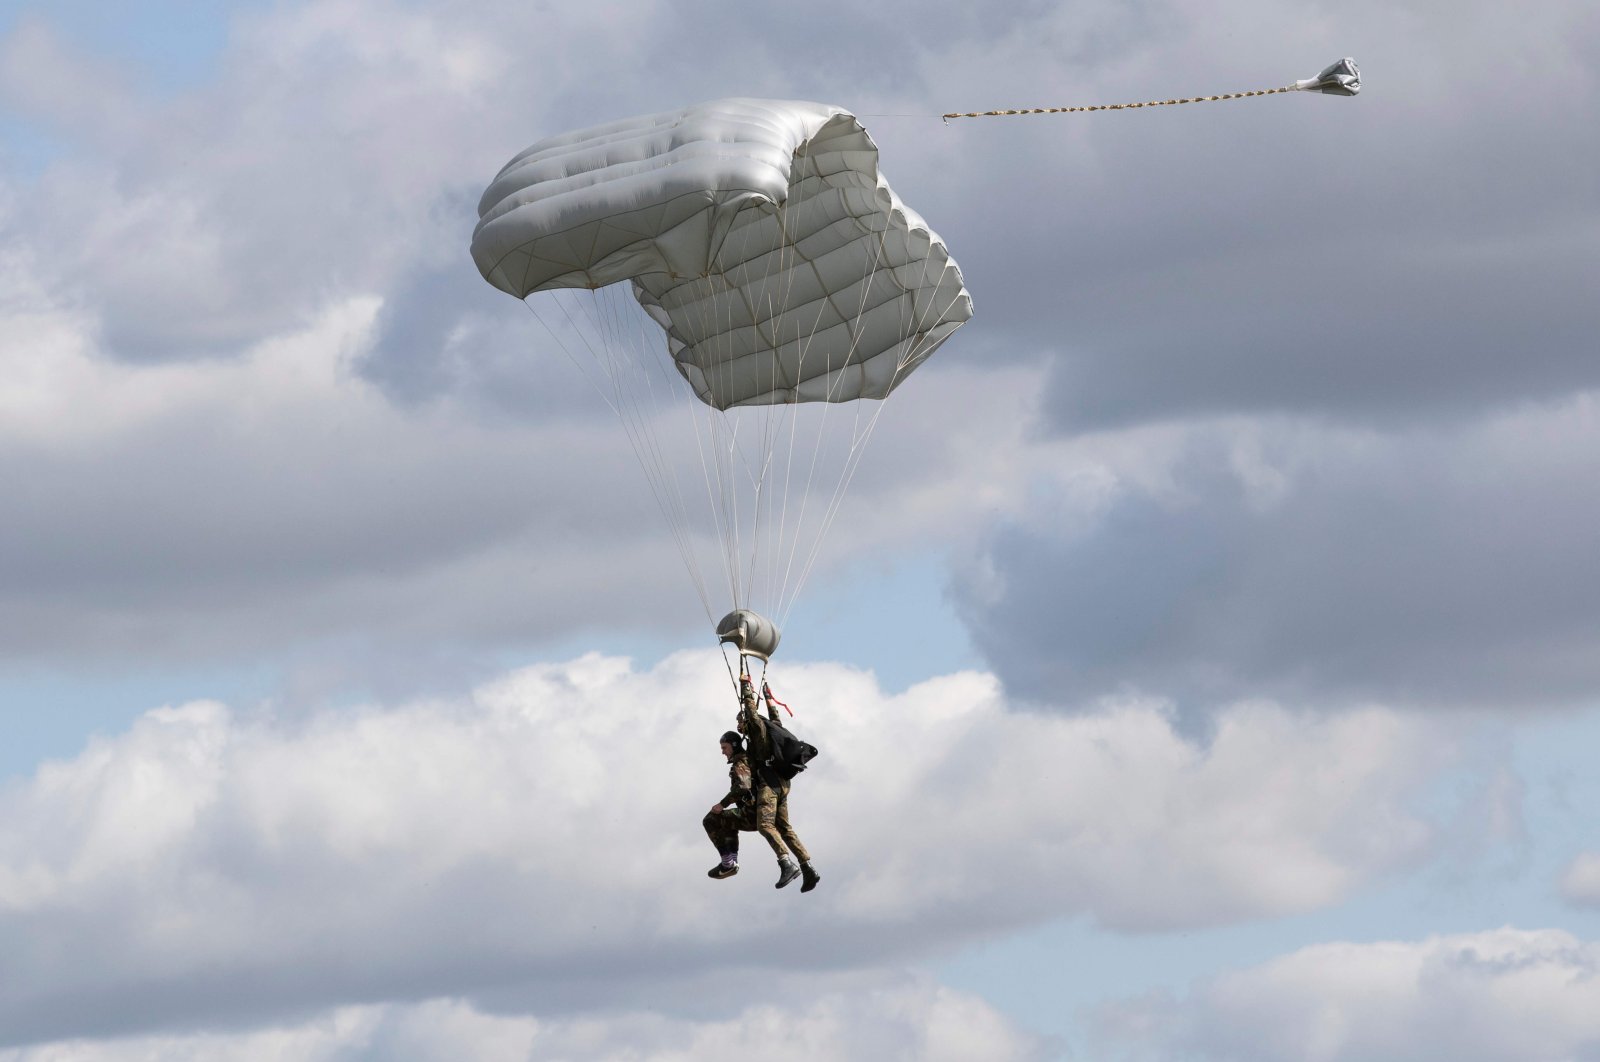 Tom Rice, a 98-year-old American WWII veteran, approaches the landing zone in a tandem parachute jump near Groesbeek, the Netherlands, Sept. 19, 2019. (AP Photo)